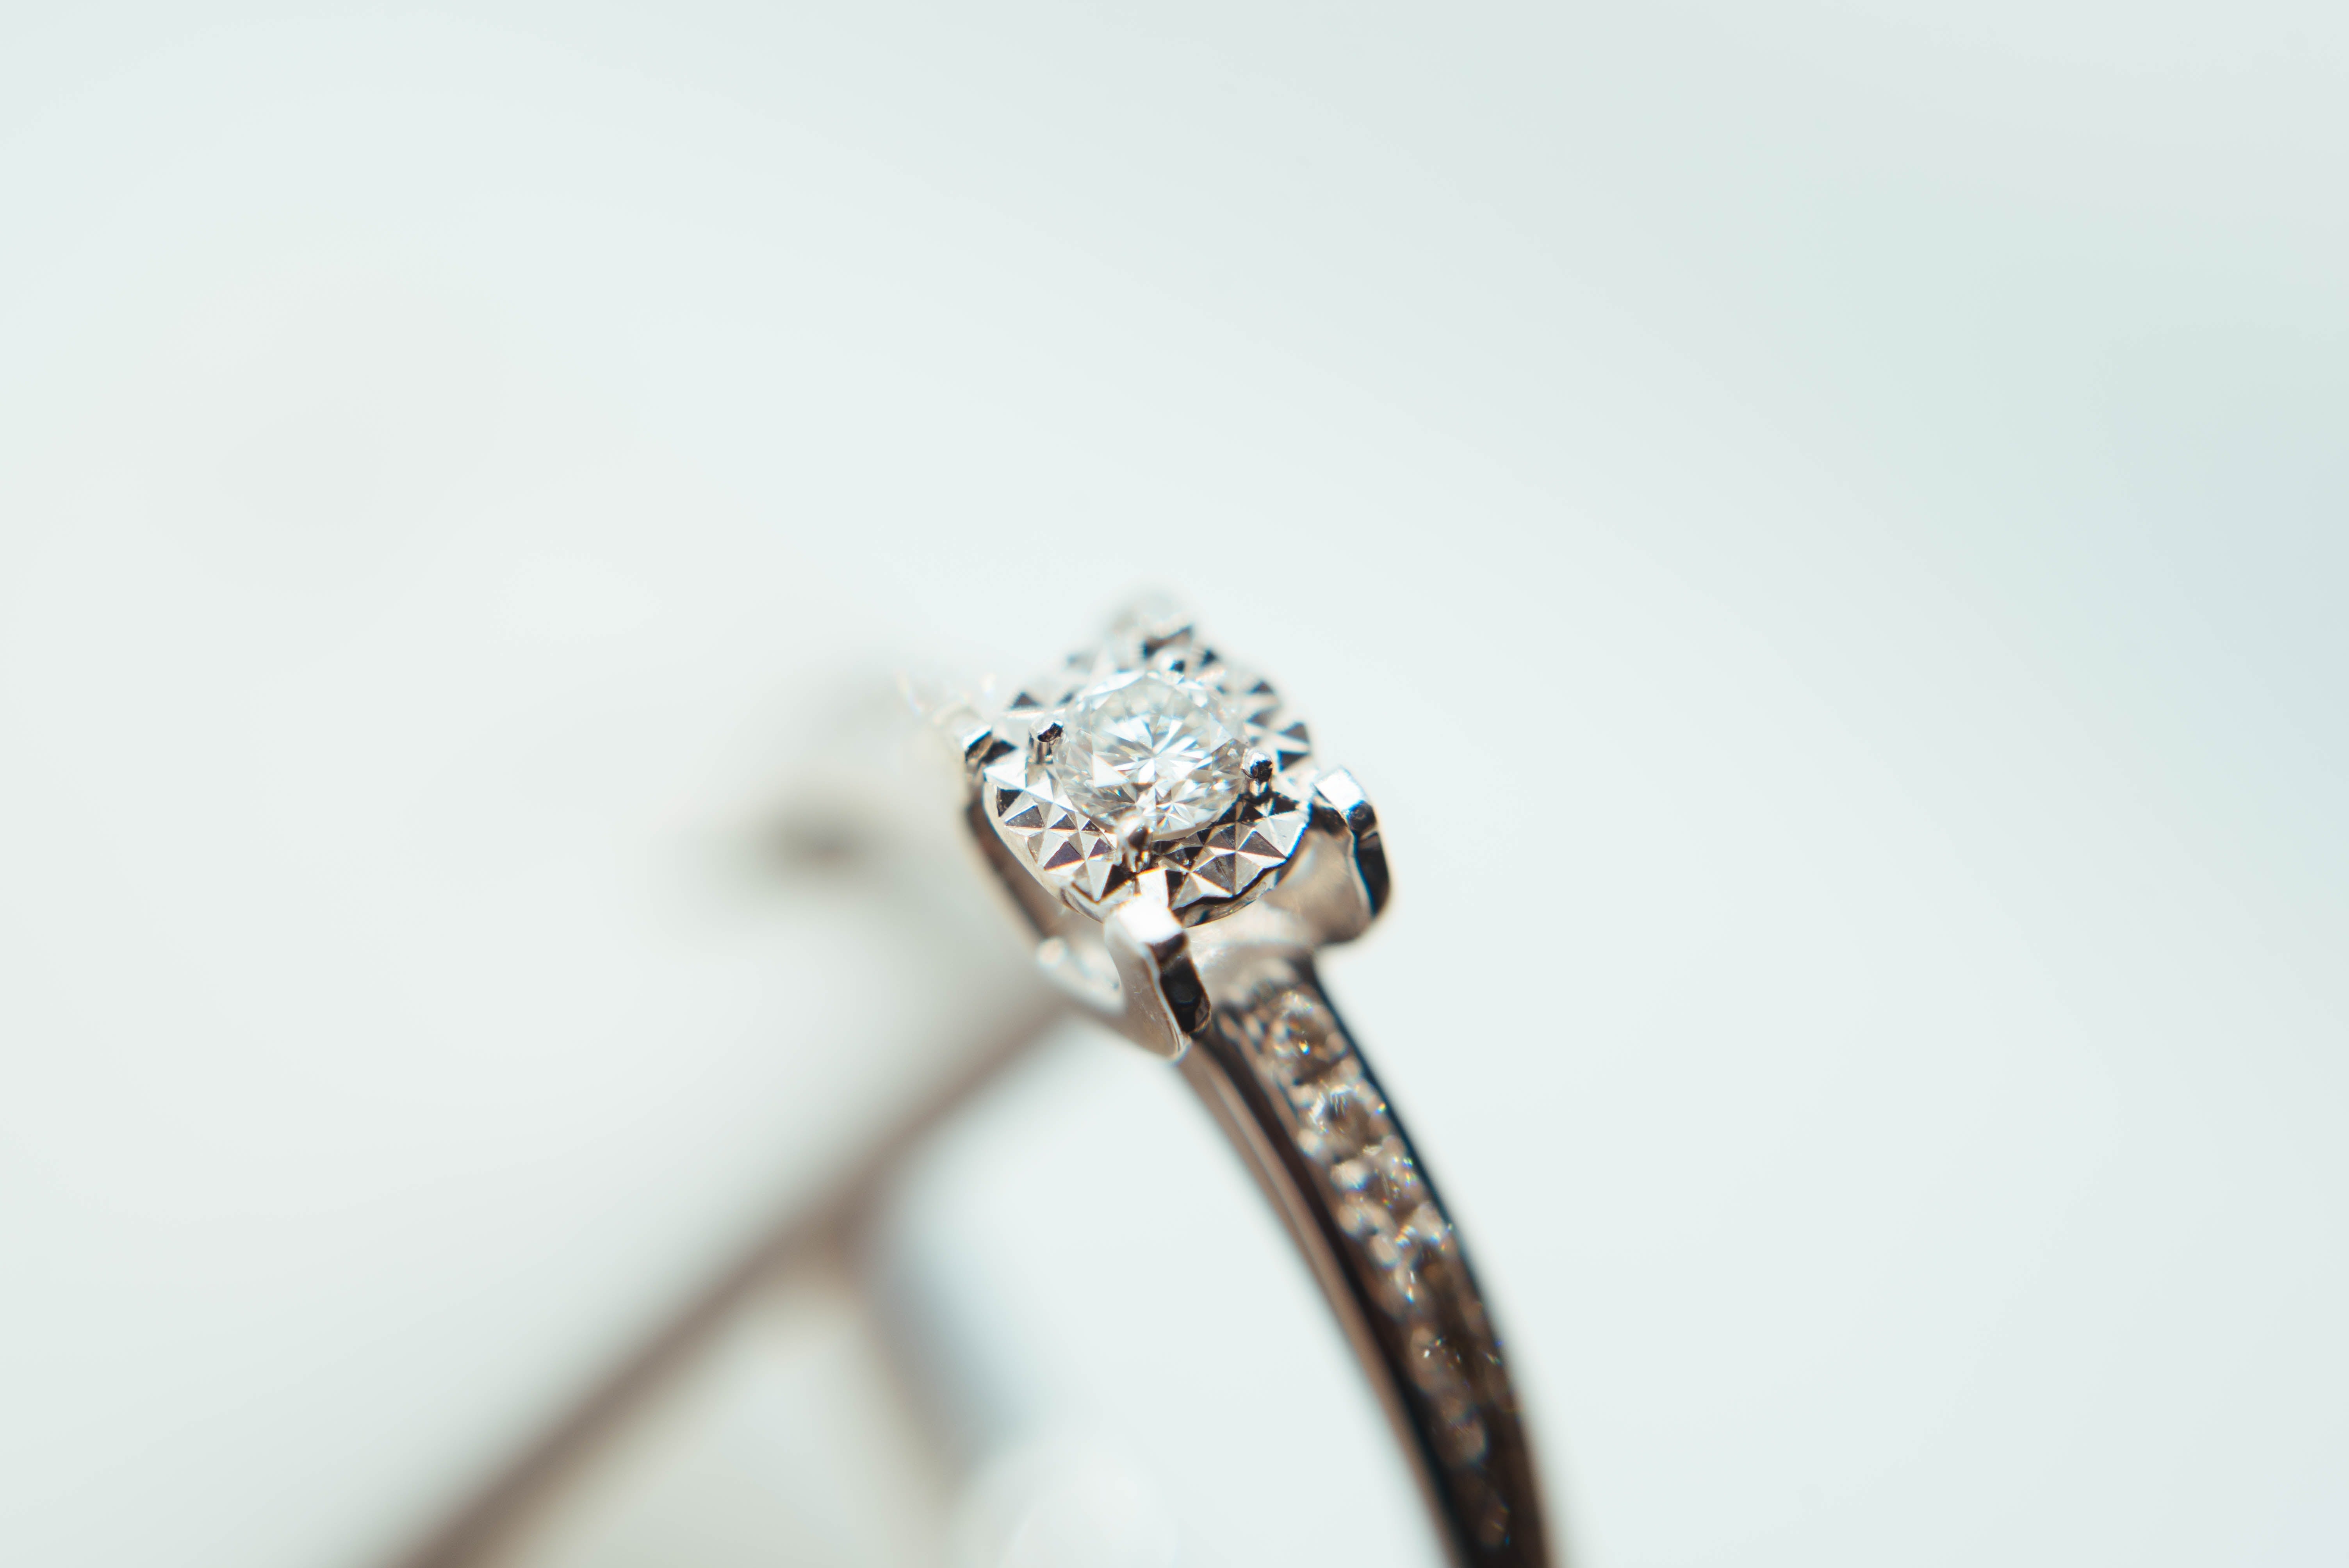 macro shot of a silver Moissanite engagement ring against white background